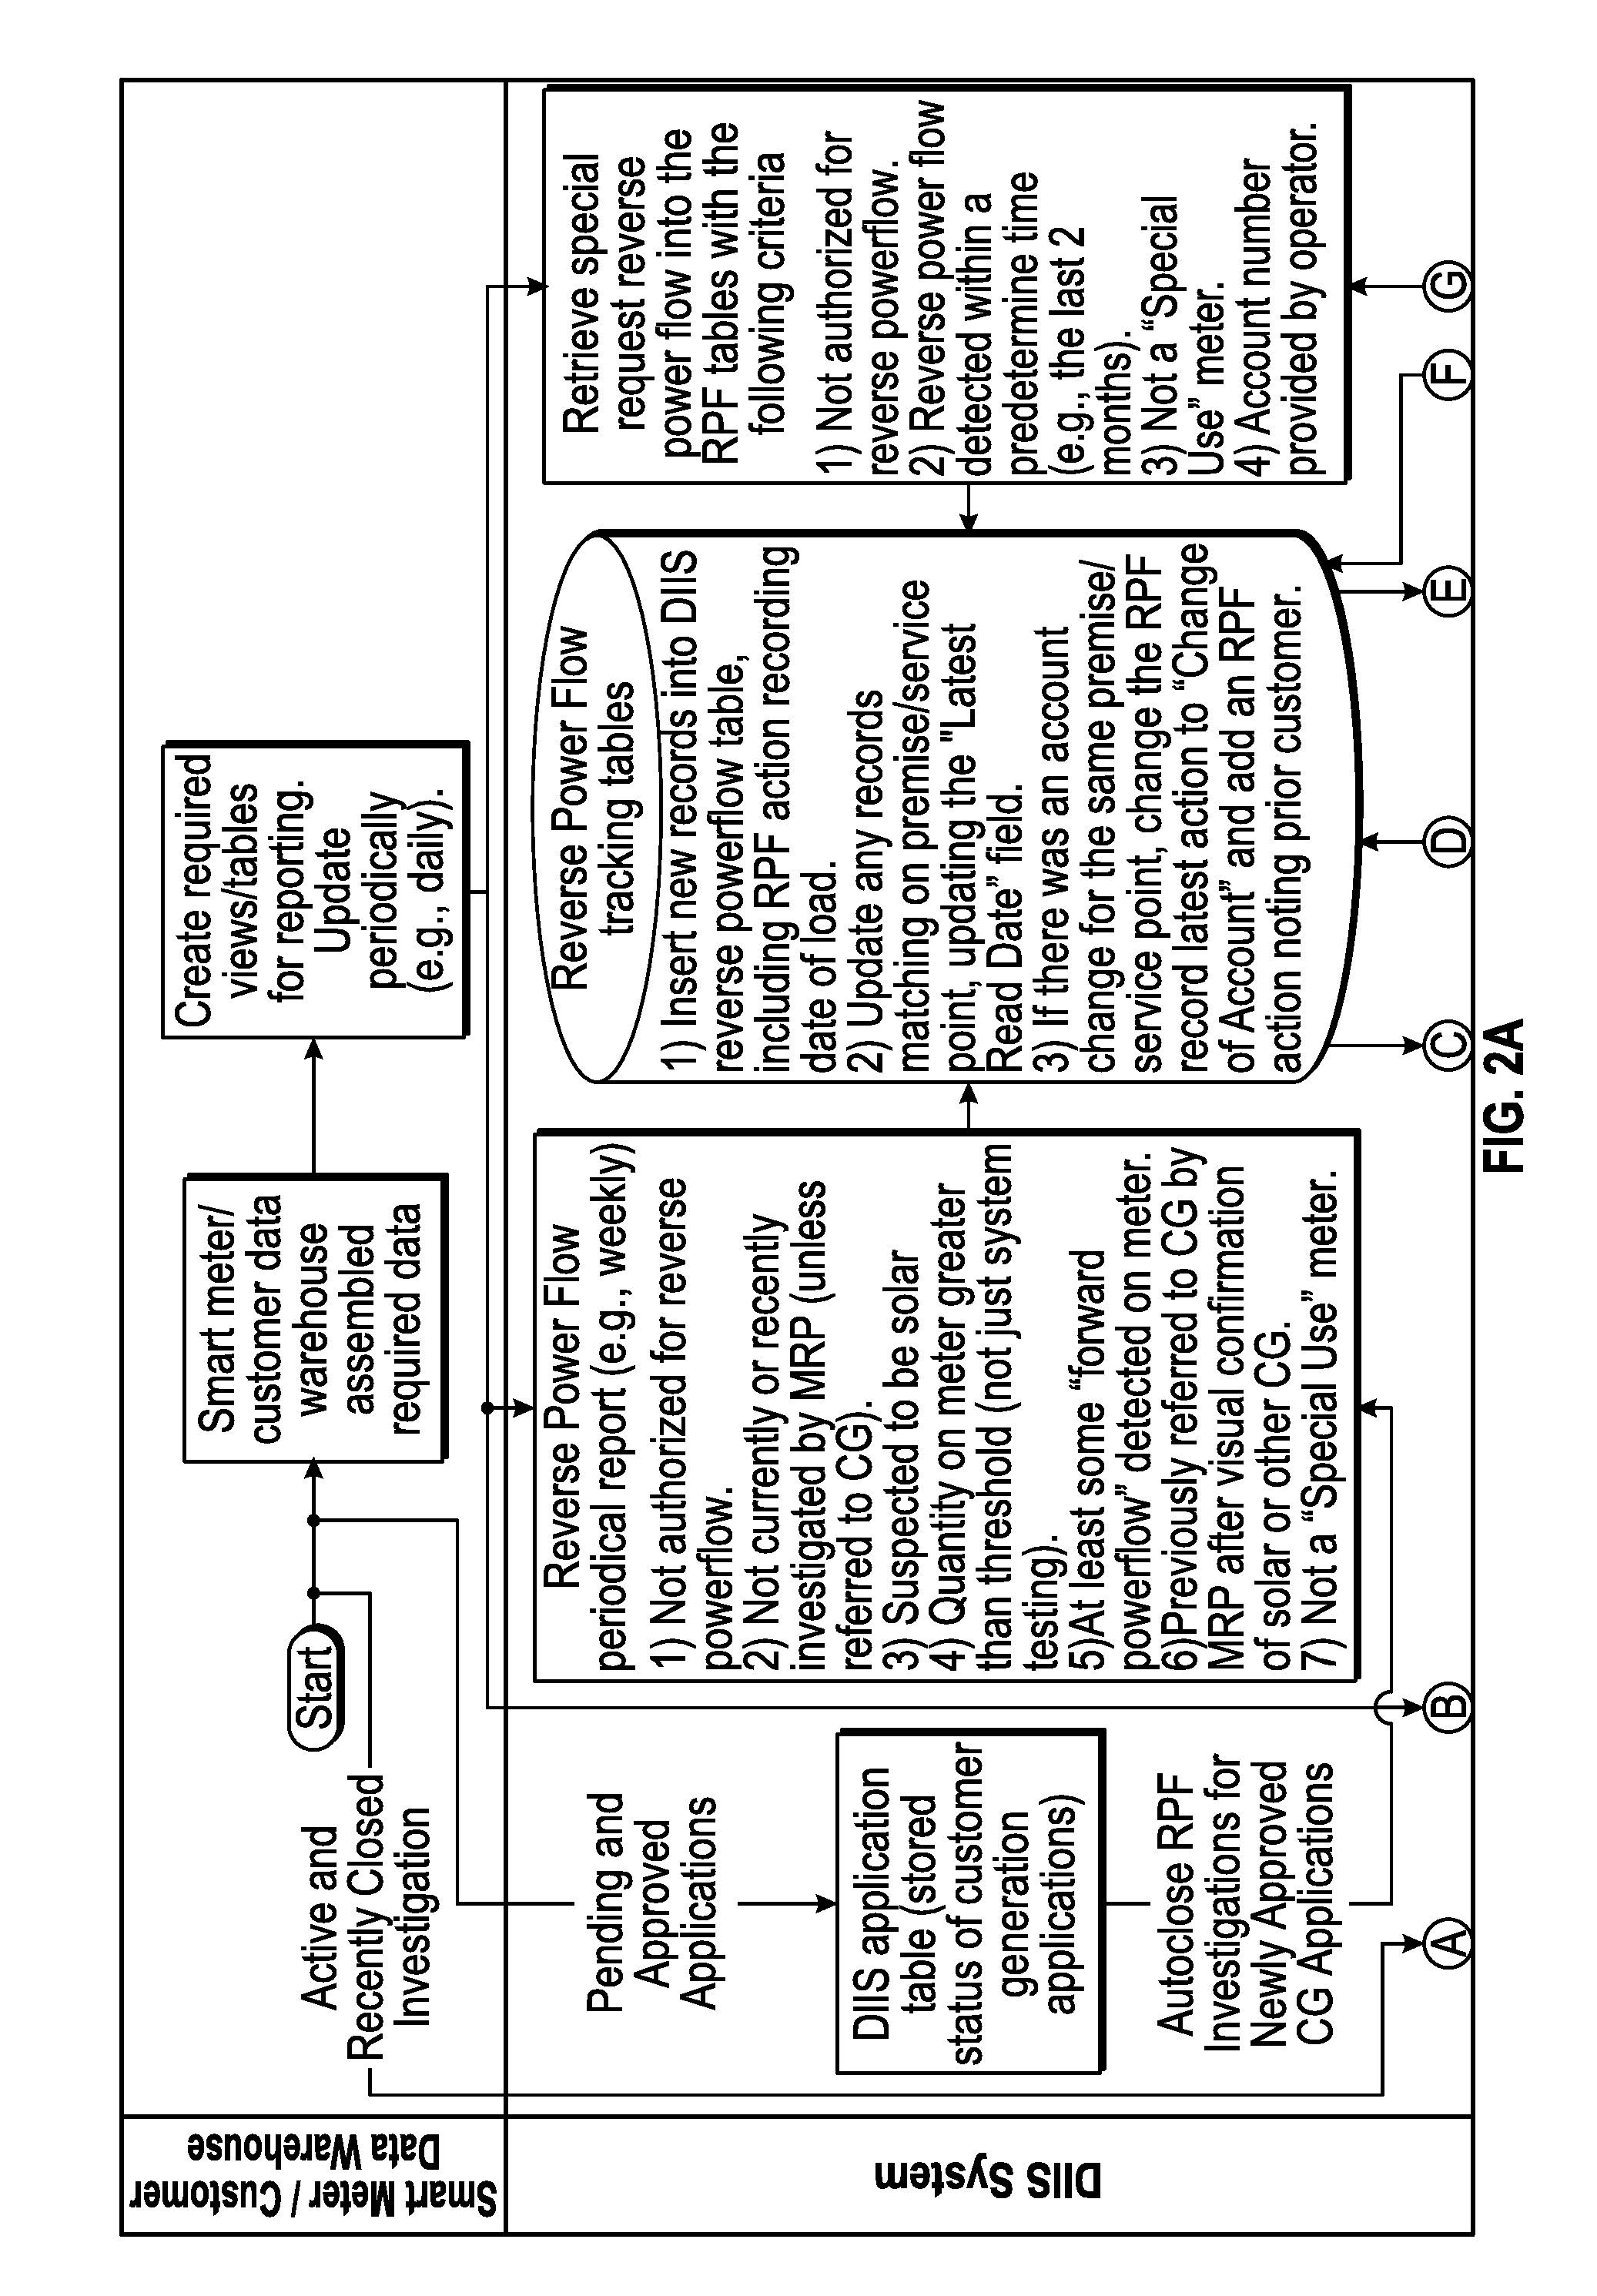 Distribution interconnection information systems and methods